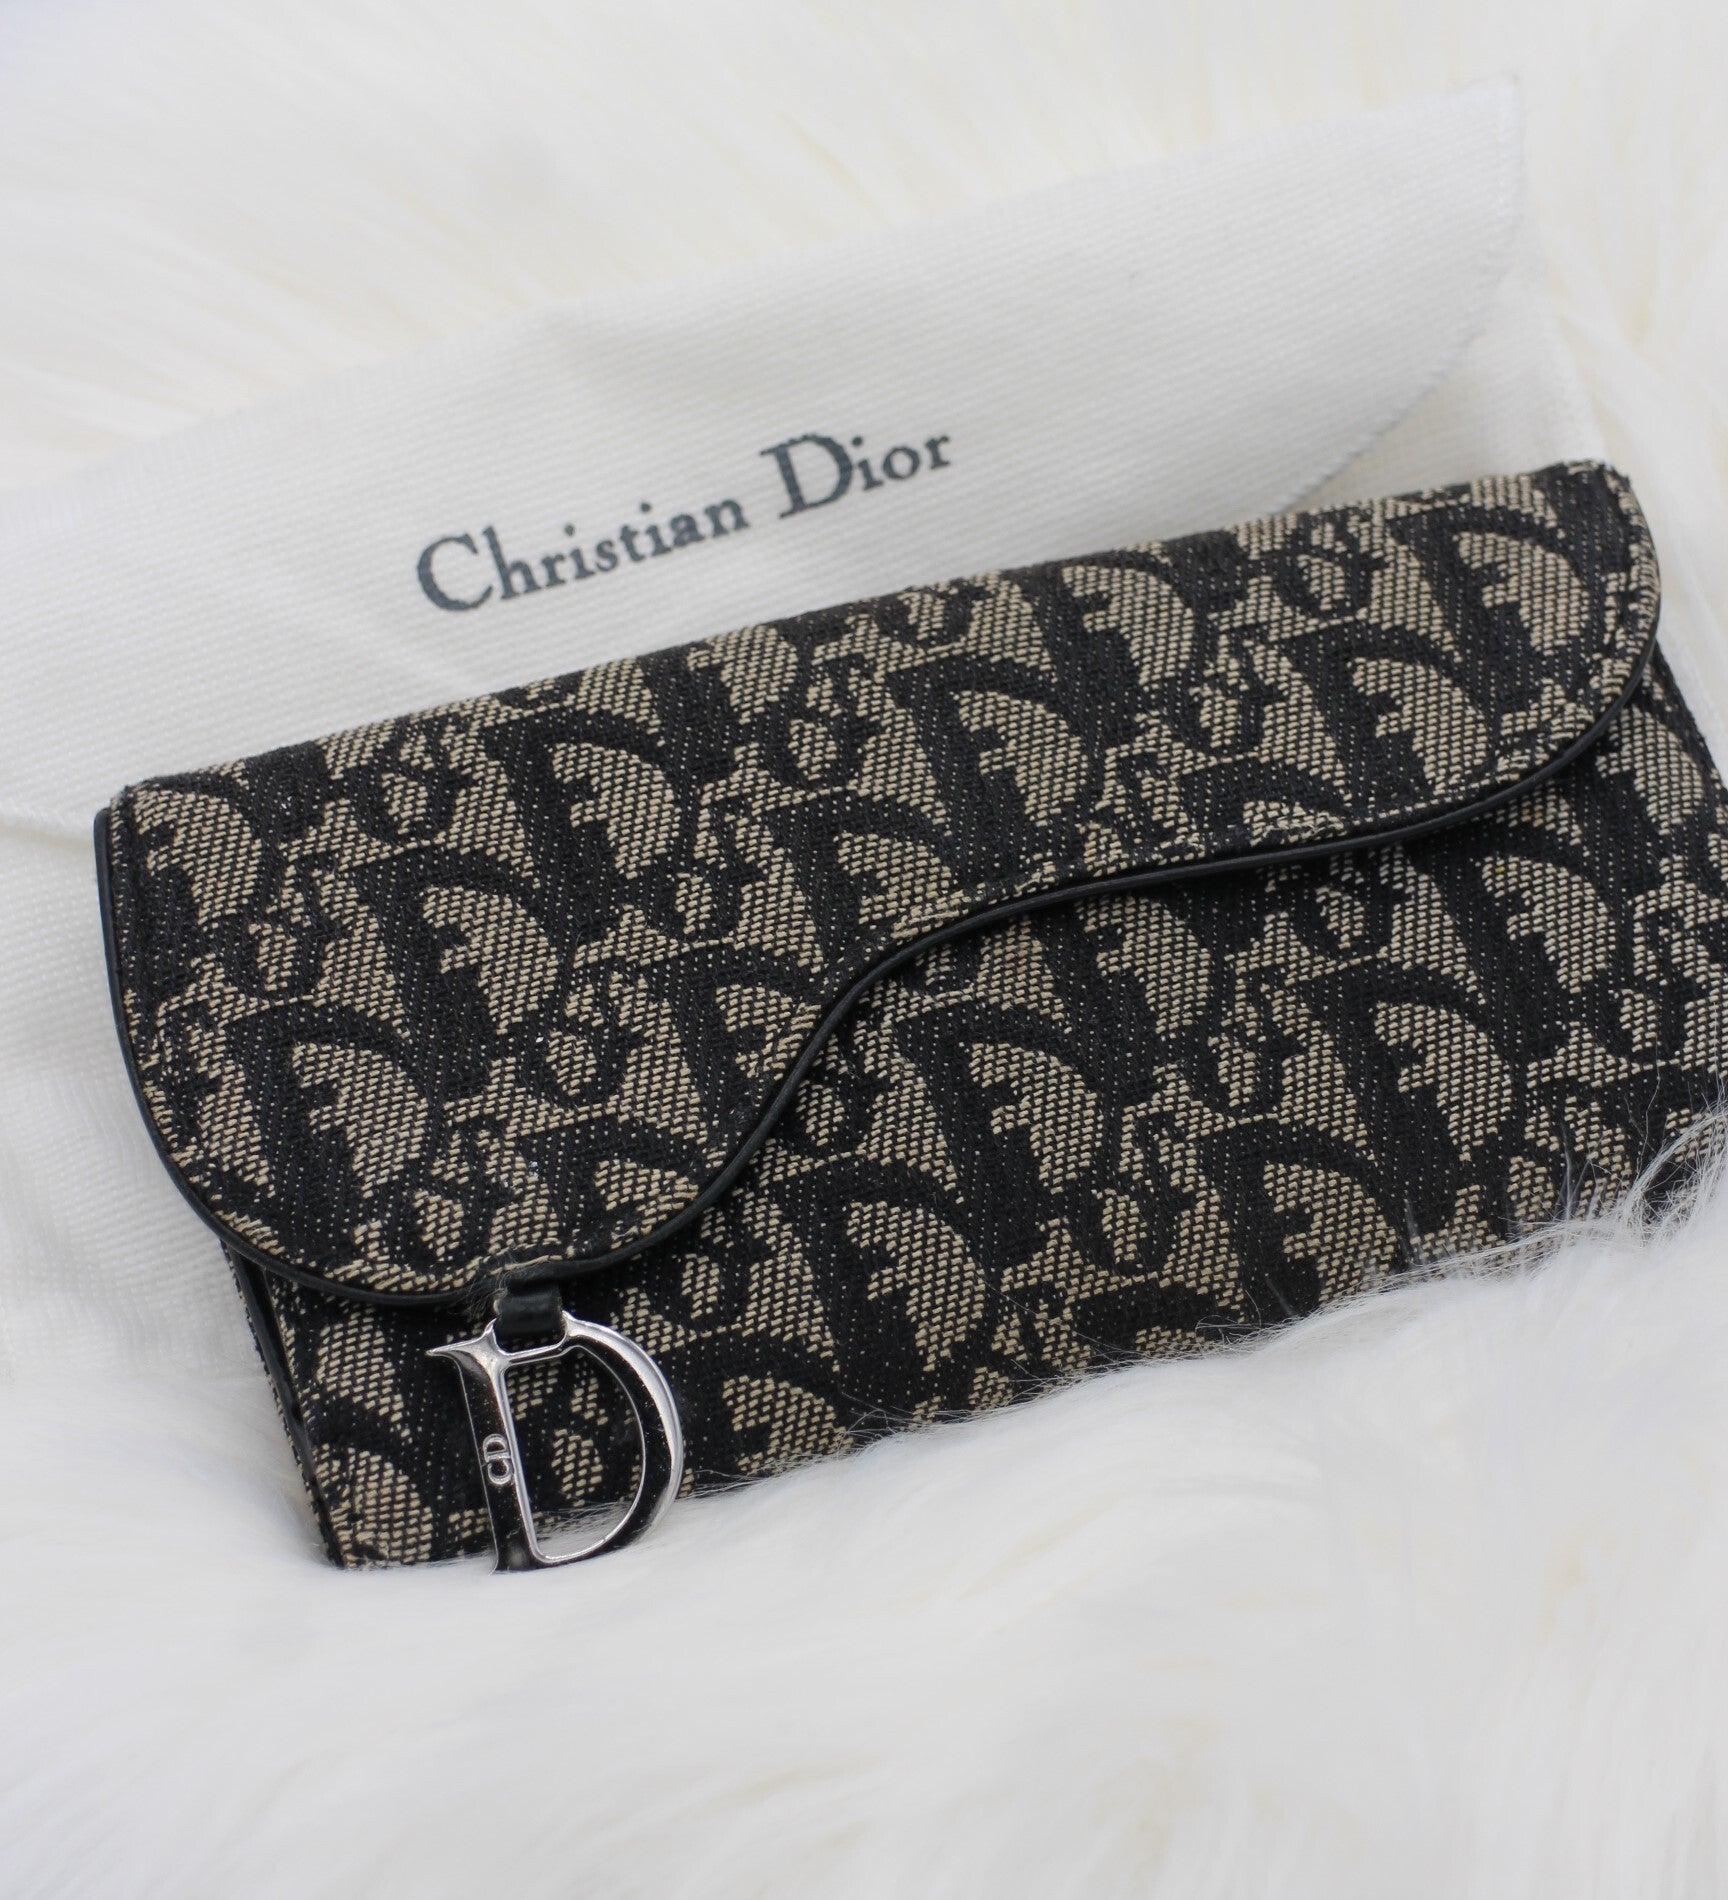 Dior Card Holder & Wallet Collection - Lady Dior, Dior Oblique Saddle,  Dioramour, 5 Gusset Card 